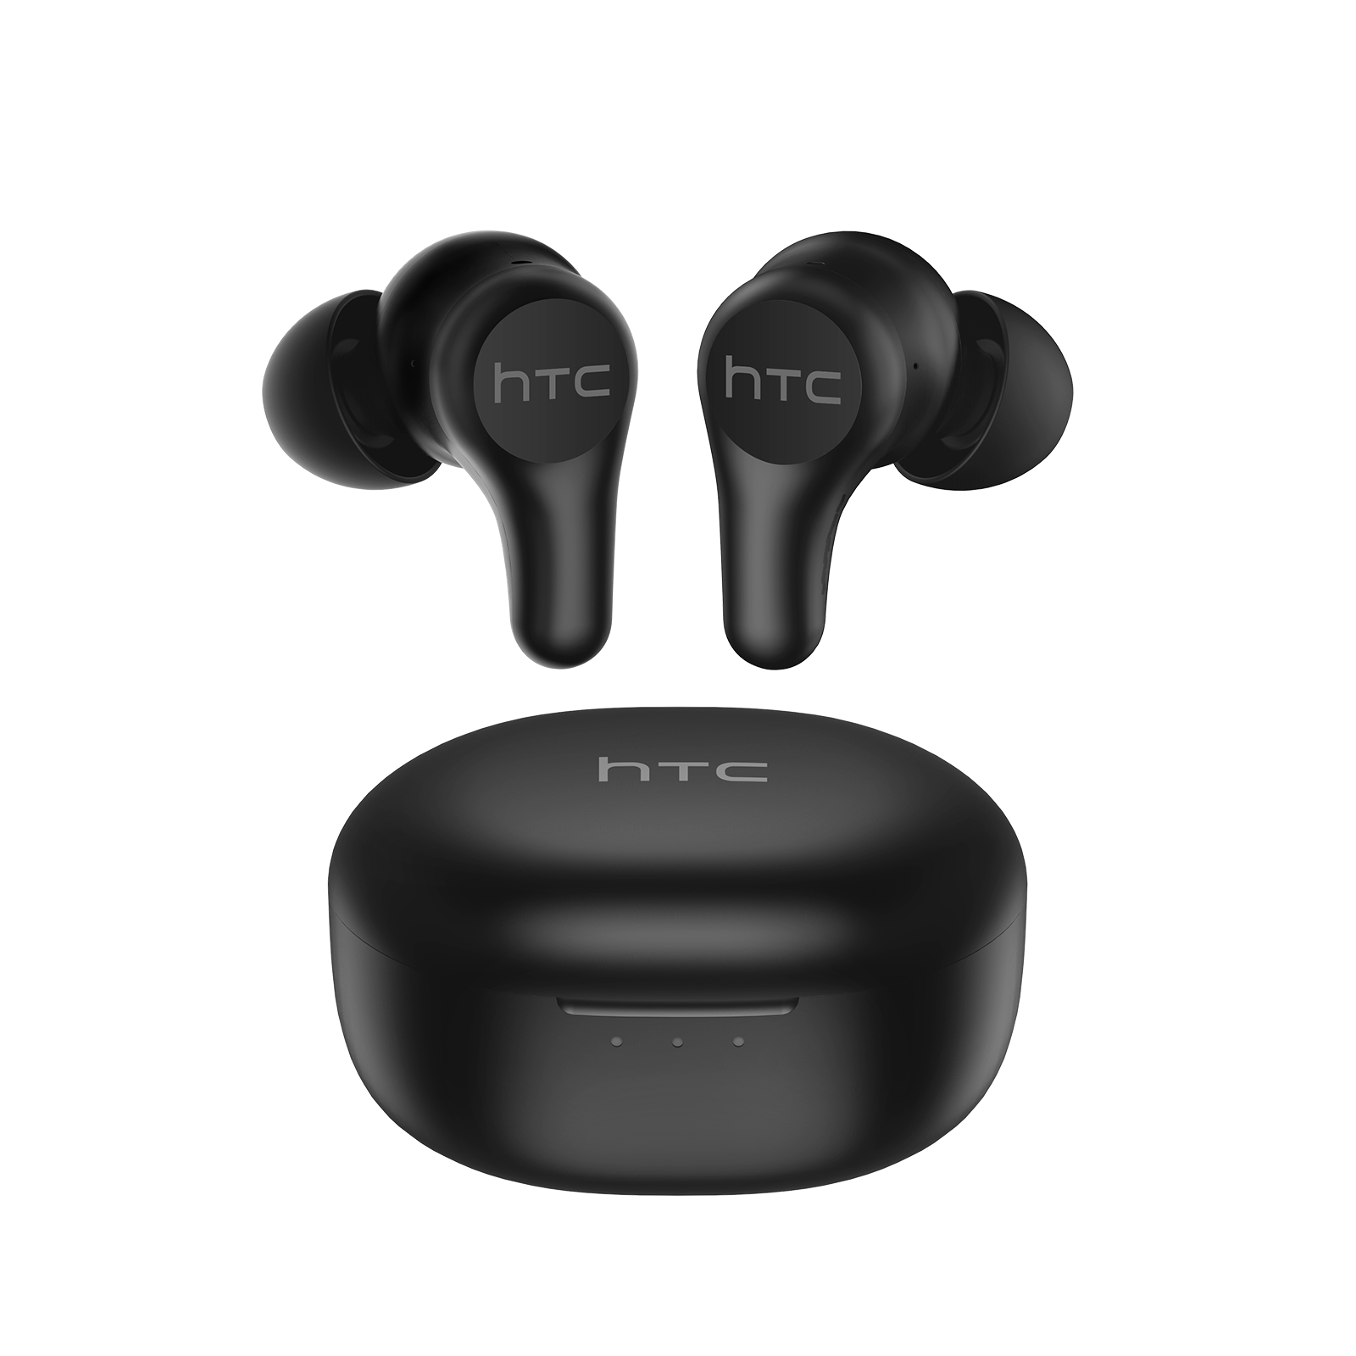 HTC True Wireless Earbuds Plus black earbuds and case back